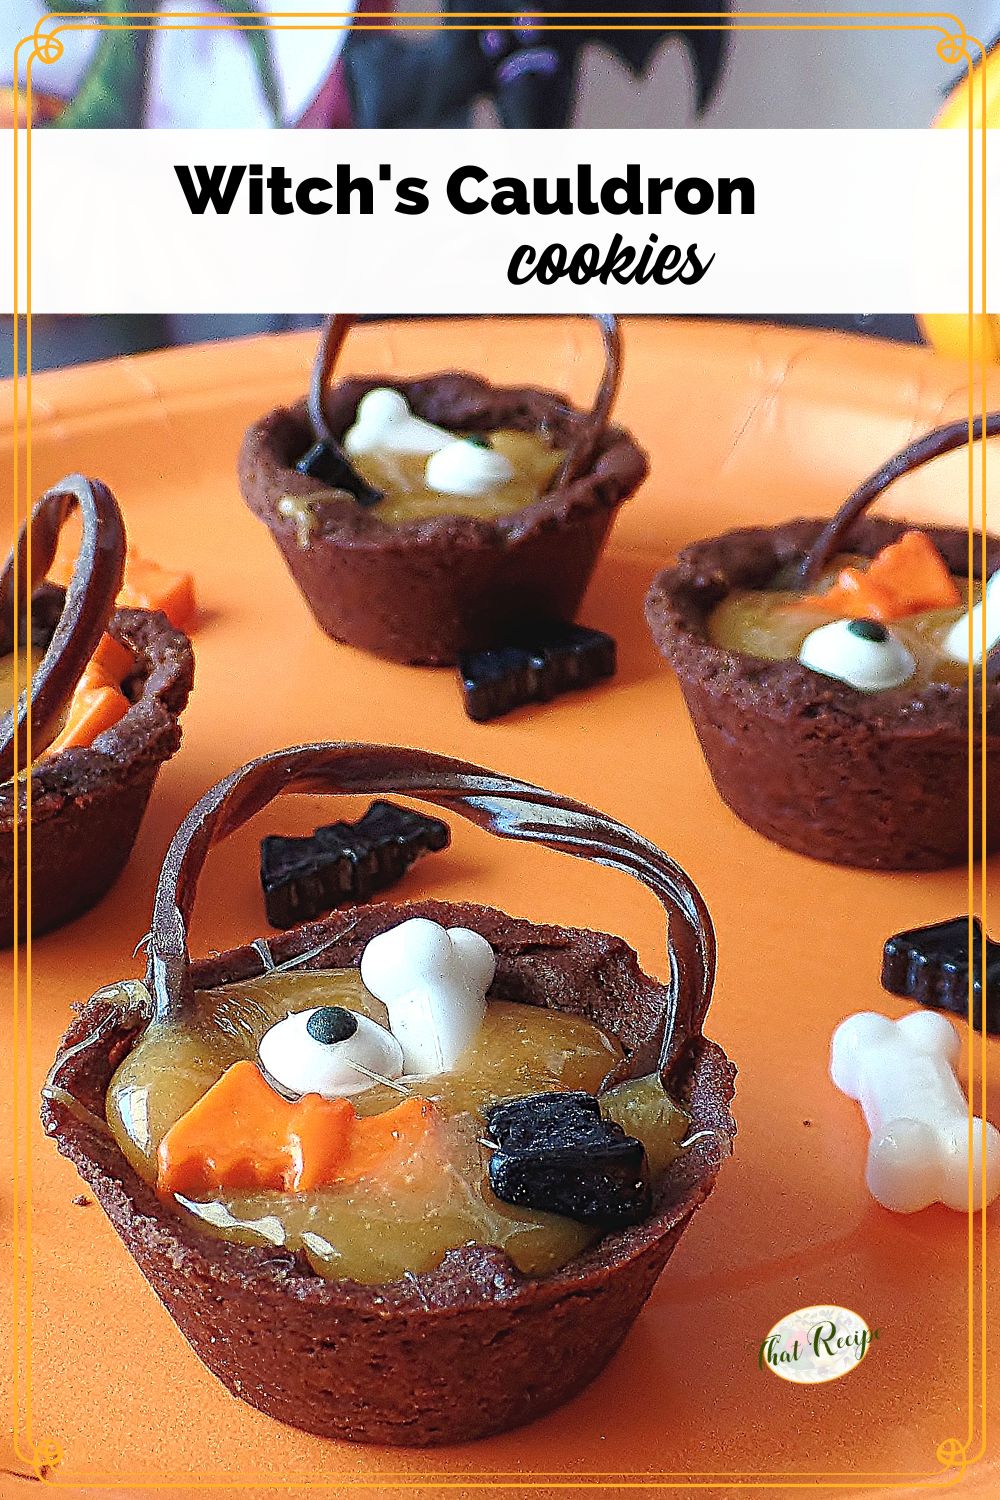 Chocolate Caramel cup cookies with text overlay "witches cauldron cookies"